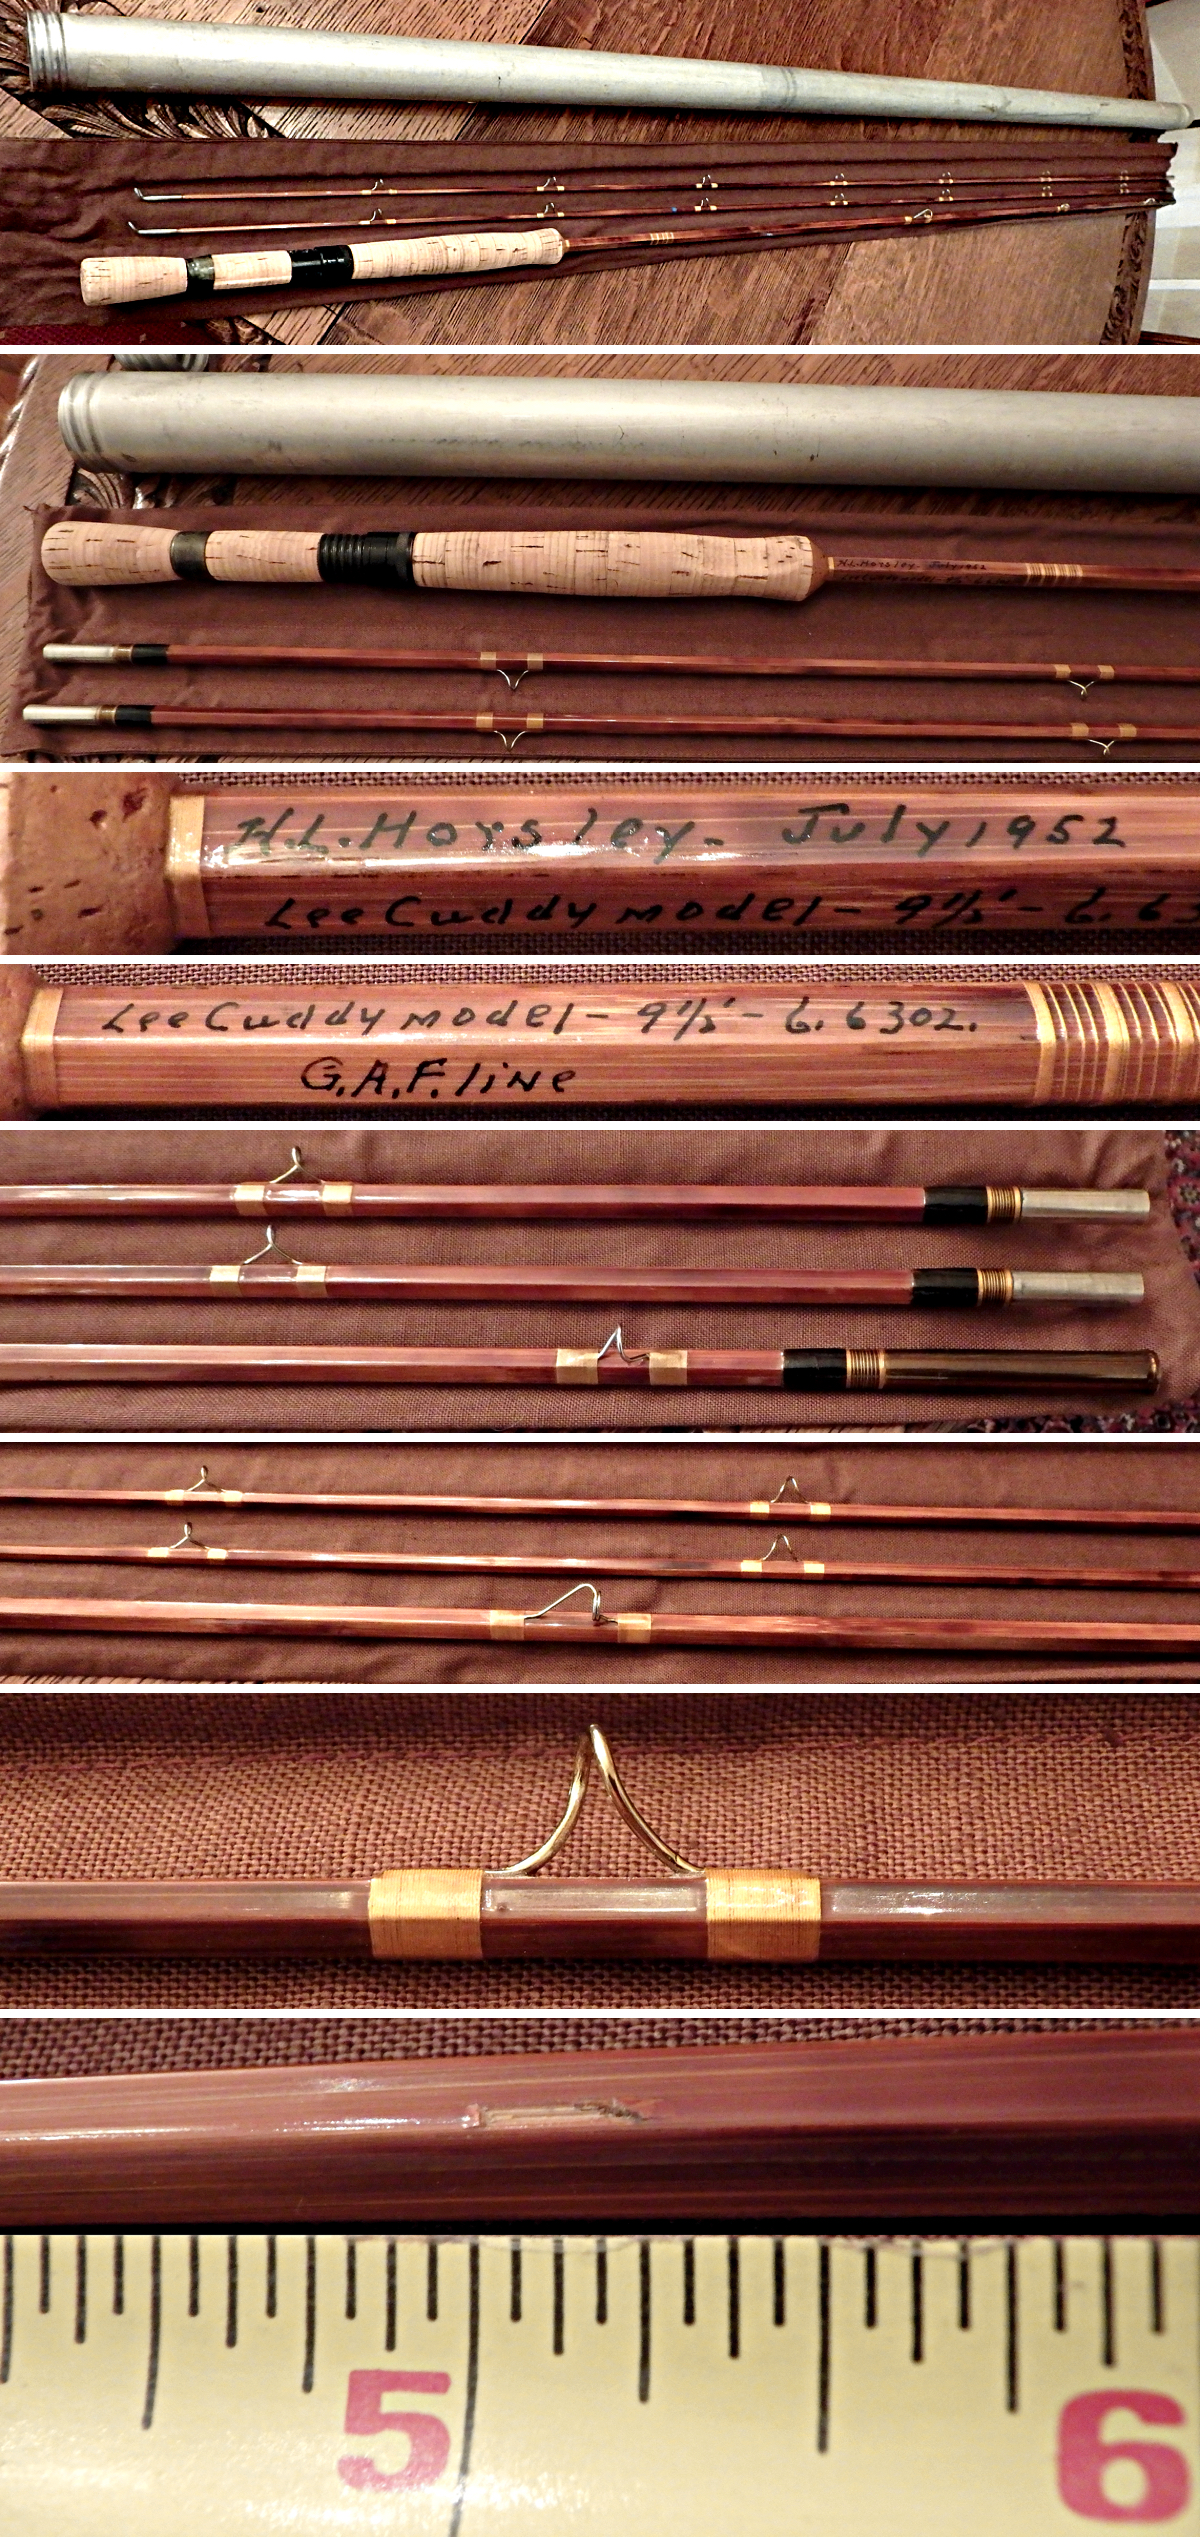 Boutique) JIM PAYNE 102 8'0 5 wt Bamboo Fly Rods / Famous Taper